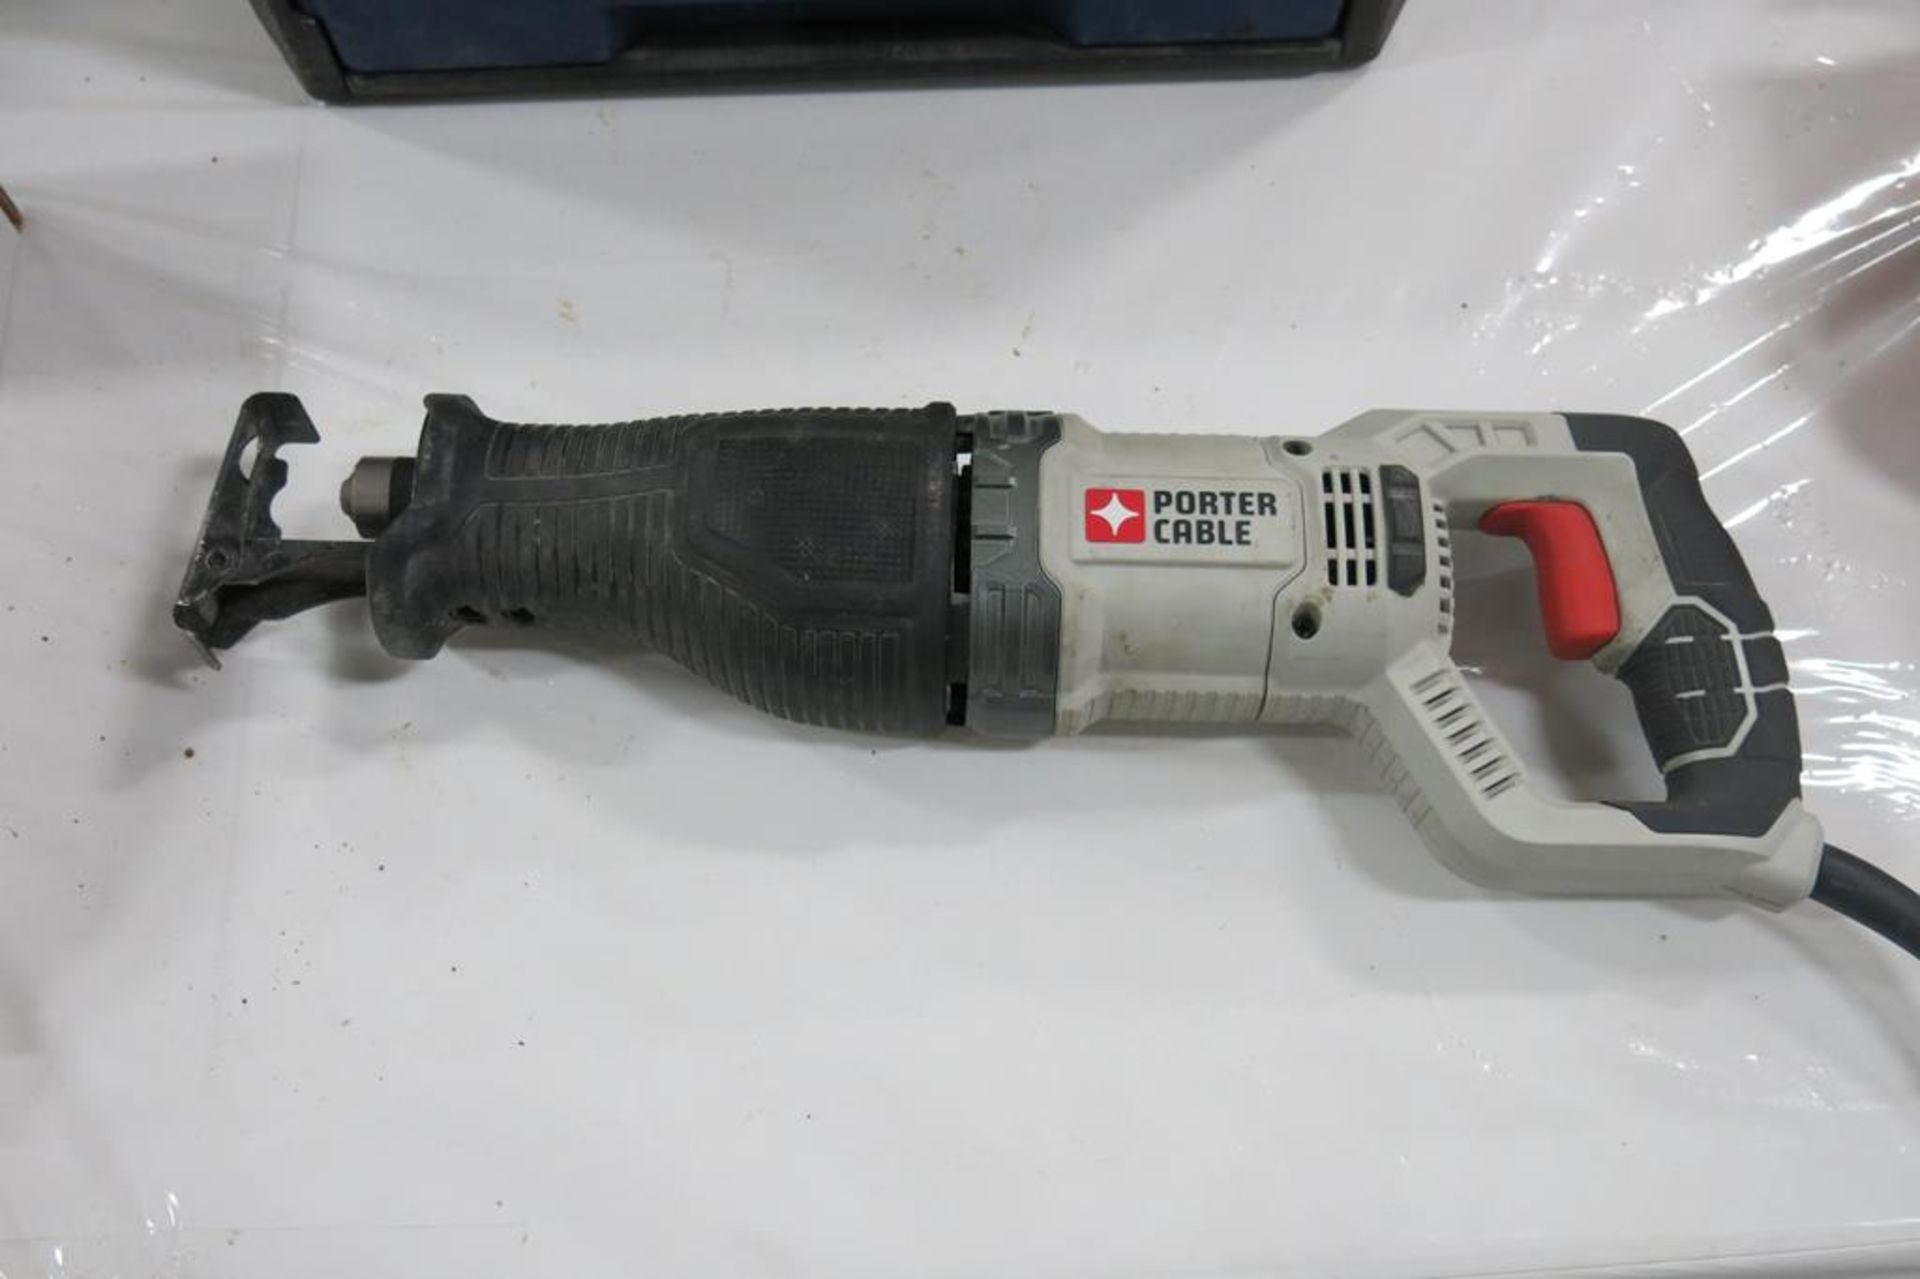 PORTER-CABLE, PCE360, RECIPROCATING, VARIABLE SPEED SAWZALL, 110 VAC - Image 2 of 3